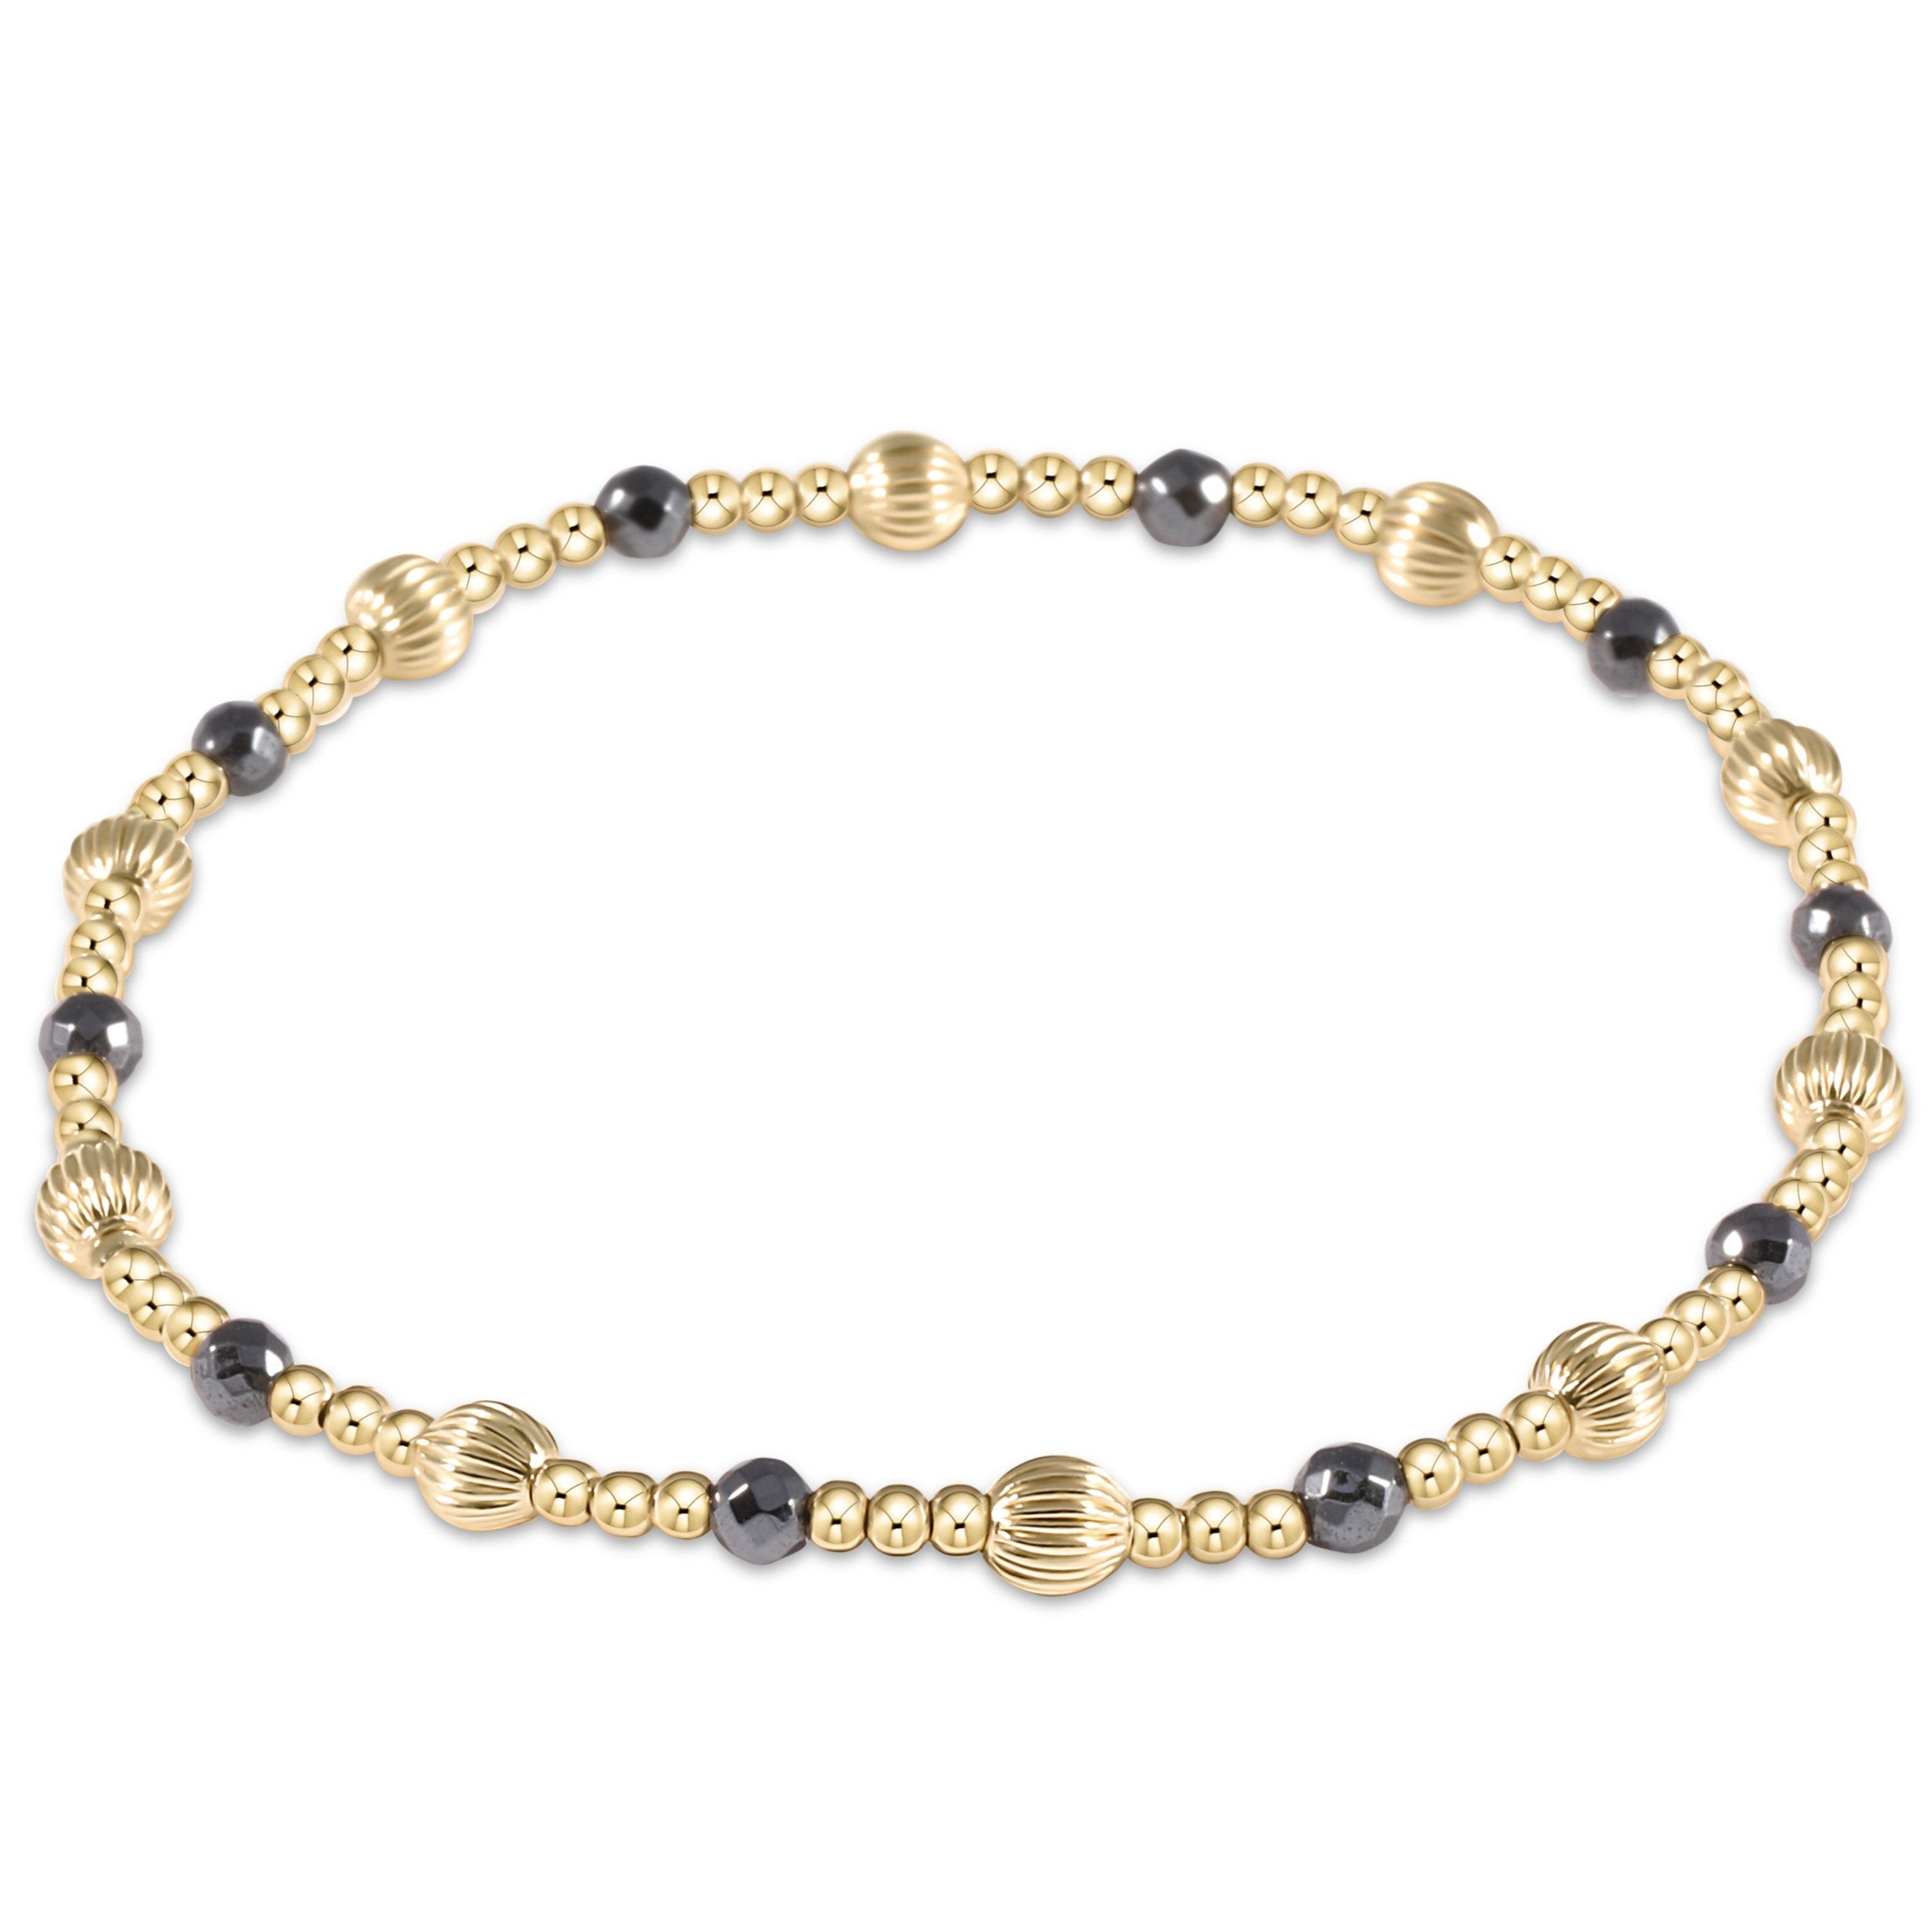 Dignity Sincerity Gold Bead Bracelet, 4mm - Faceted Hematite